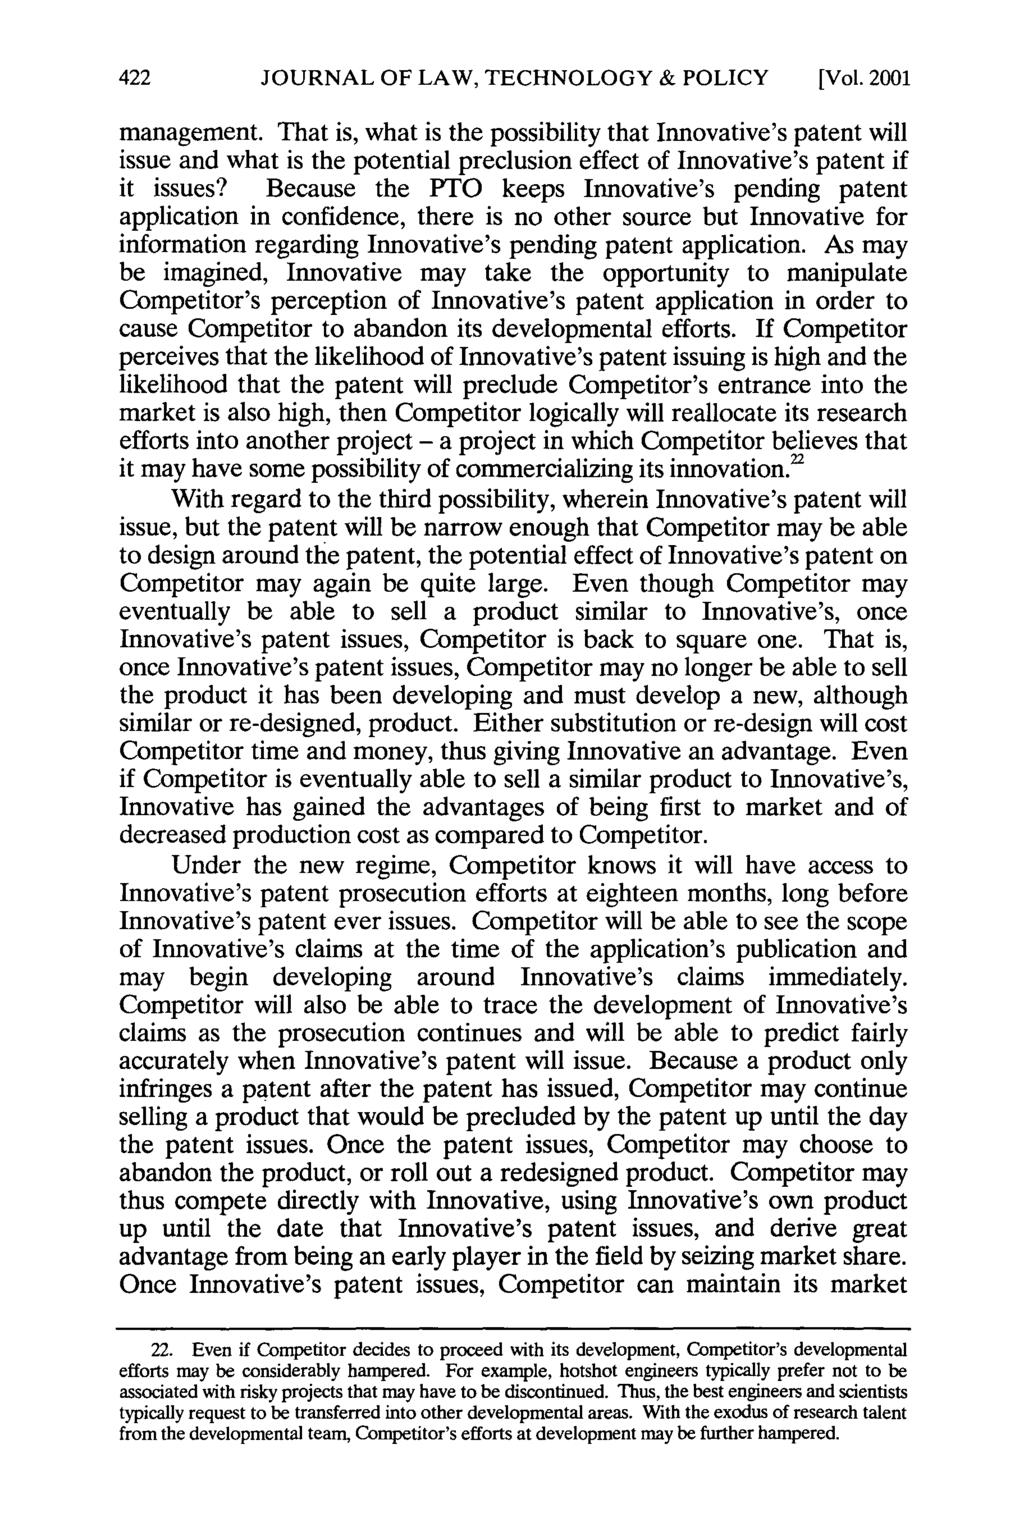 JOURNAL OF LAW, TECHNOLOGY & POLICY [Vol. 2001 management.